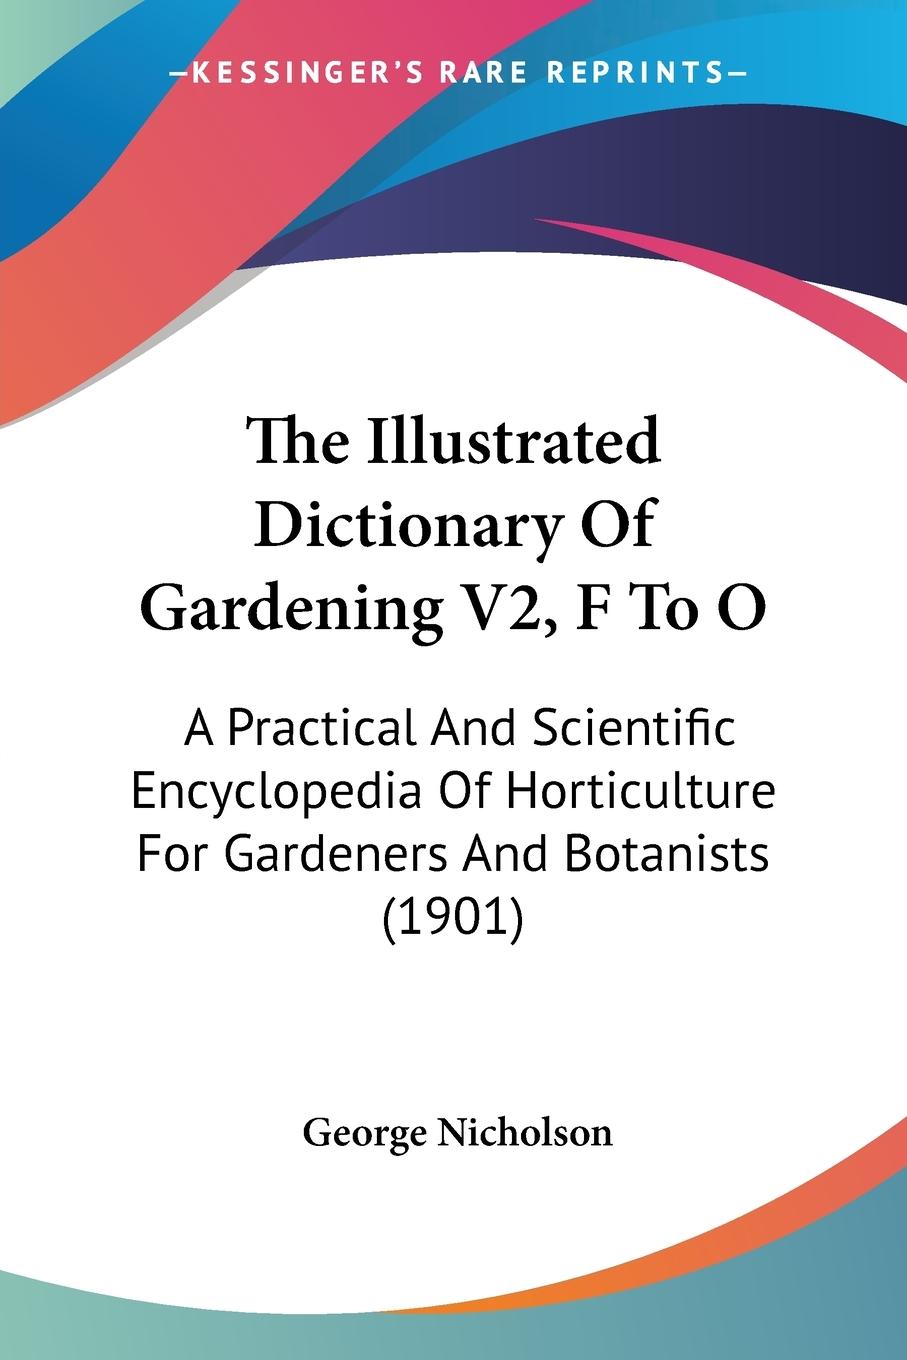 The Illustrated Dictionary Of Gardening V2, F To O